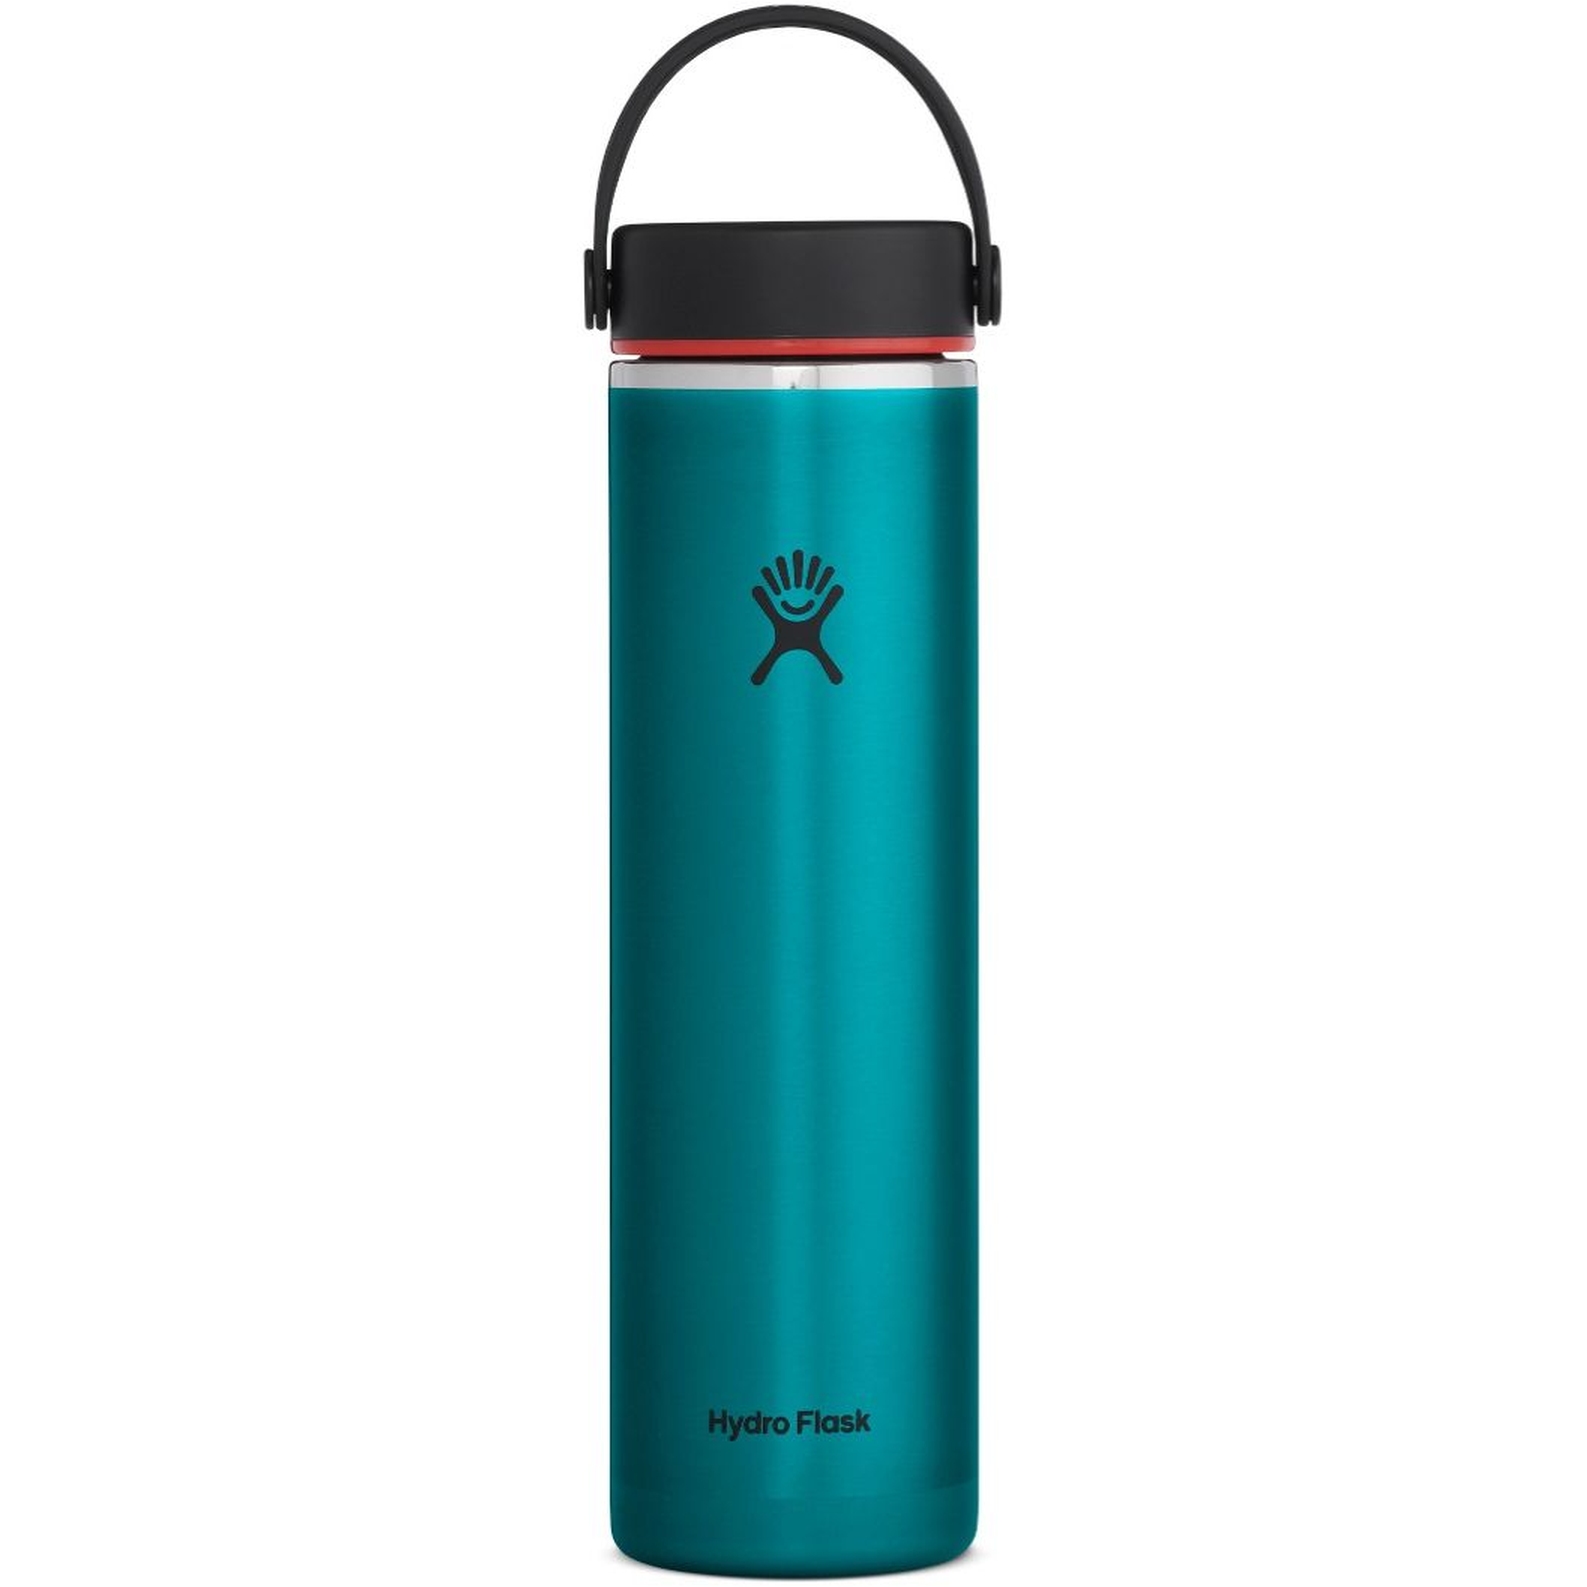 Image of Hydro Flask 24 oz Lightweight Wide Mouth Trail Series - Insulated Bottle - 710 ml - Celestine